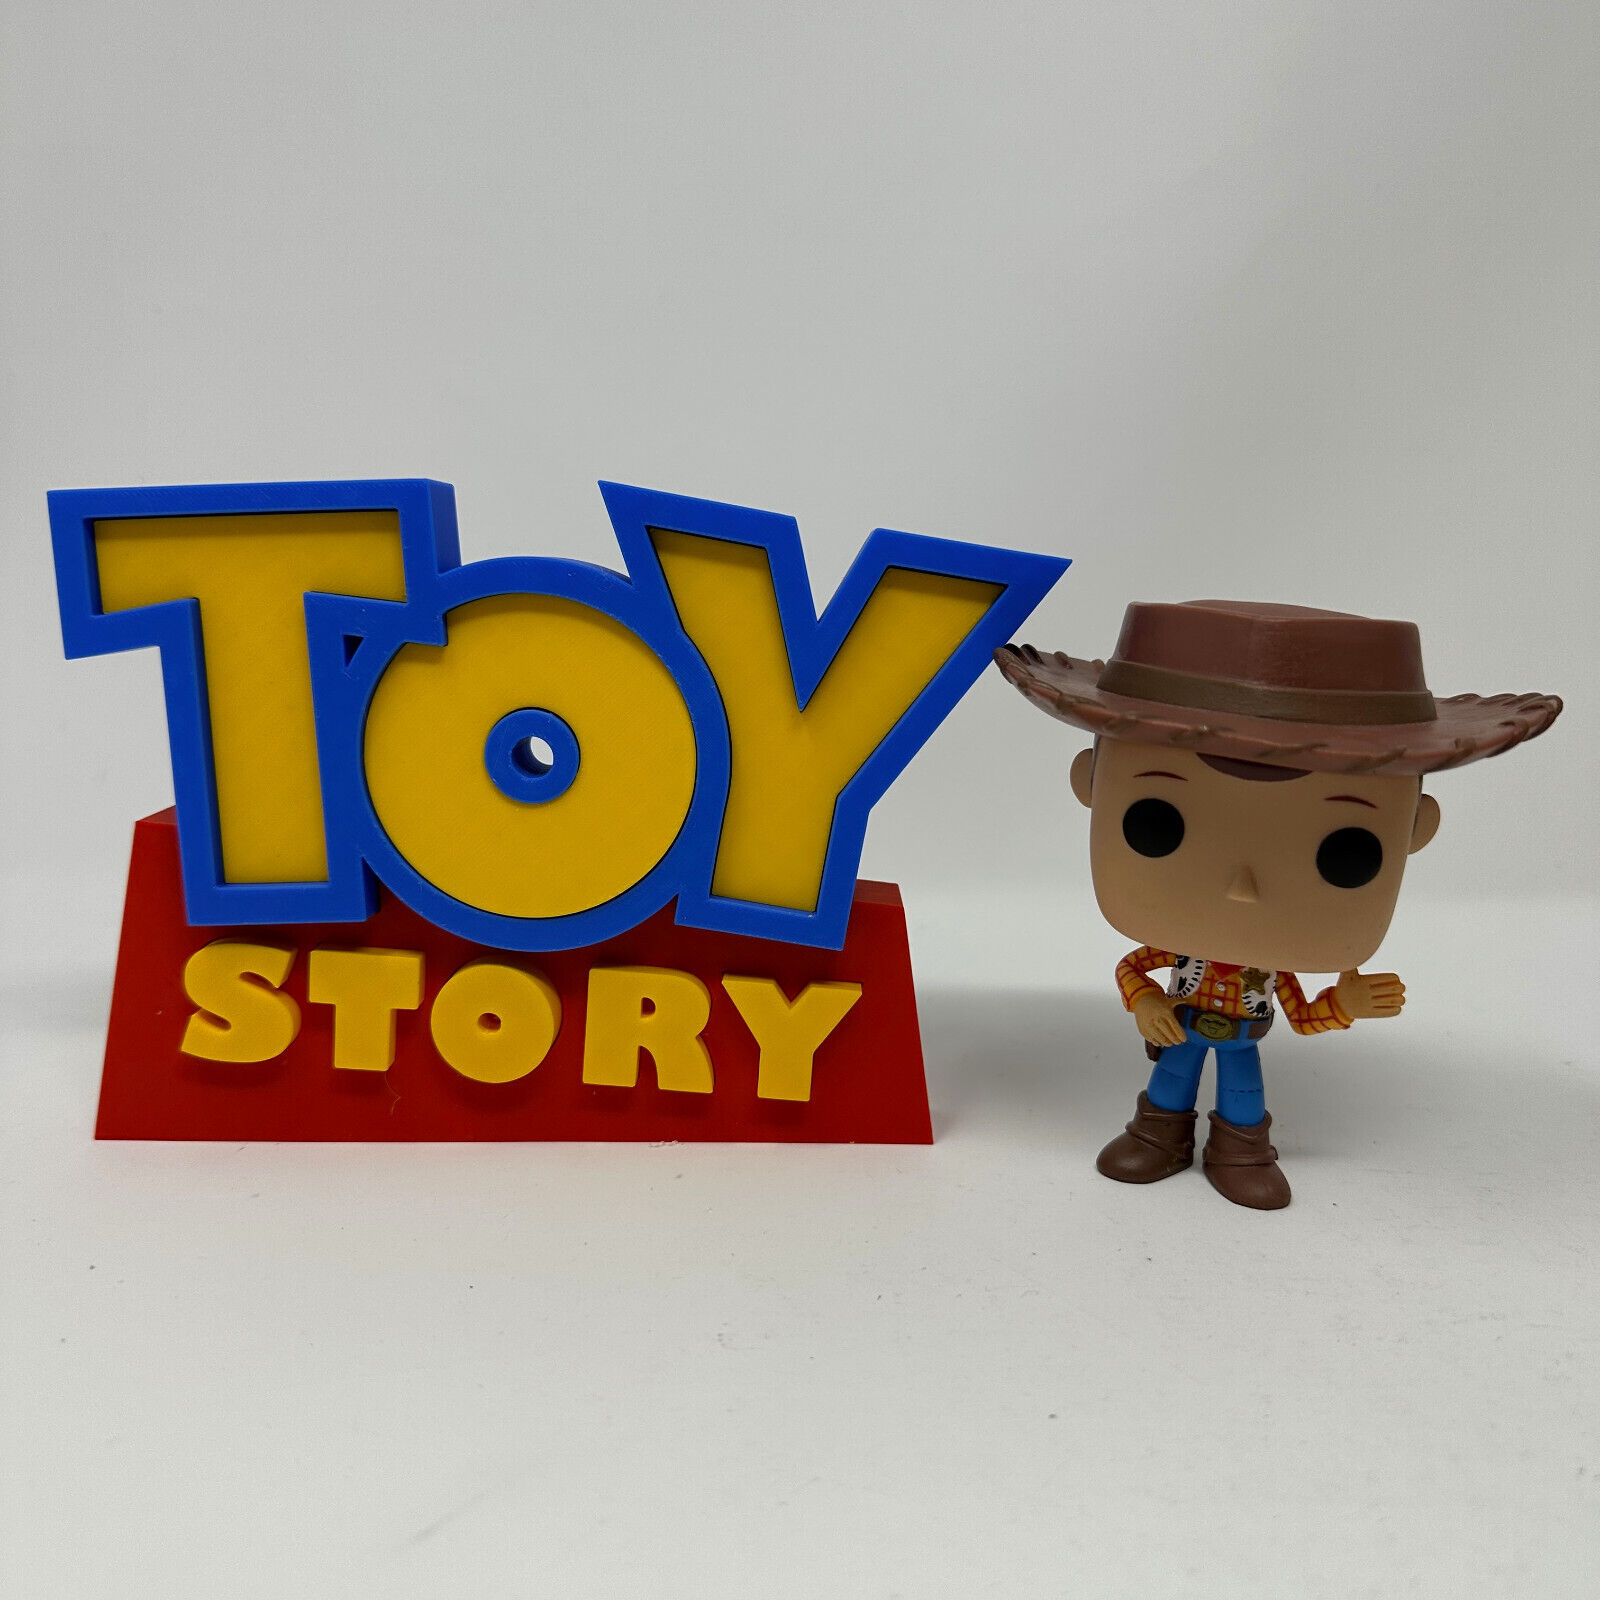 3D Printed Disney Pixar TOY STORY  Sign for your Funko Pops and collectibles